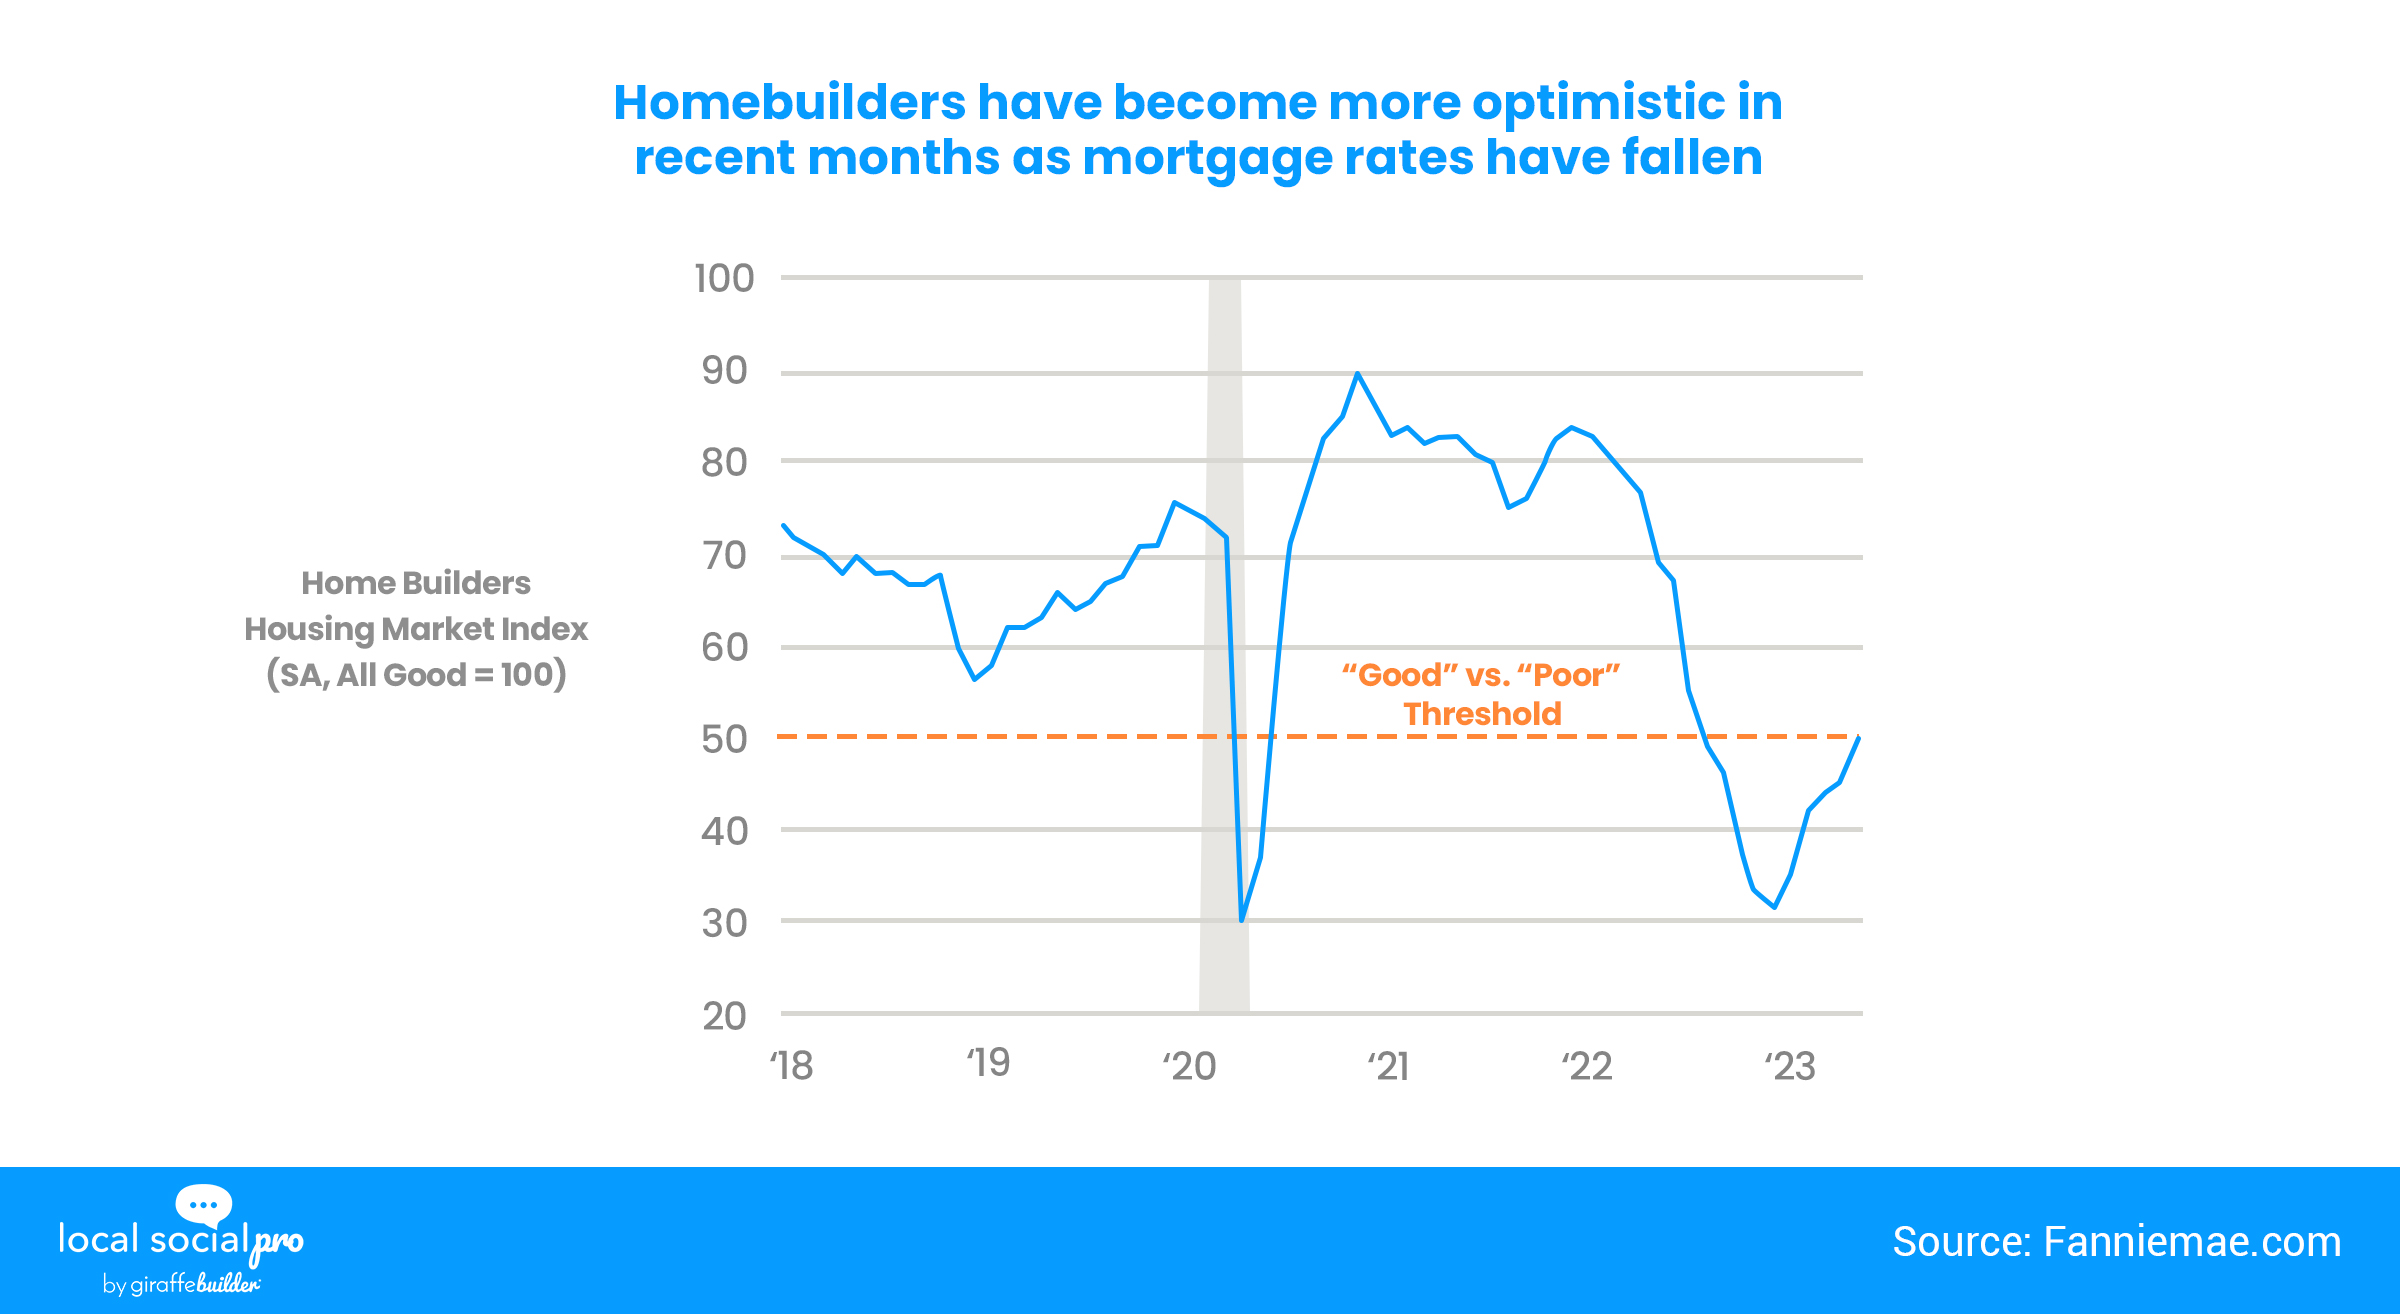 Homebuilders have become more optimistic in recent months as mortgage rates have fallen